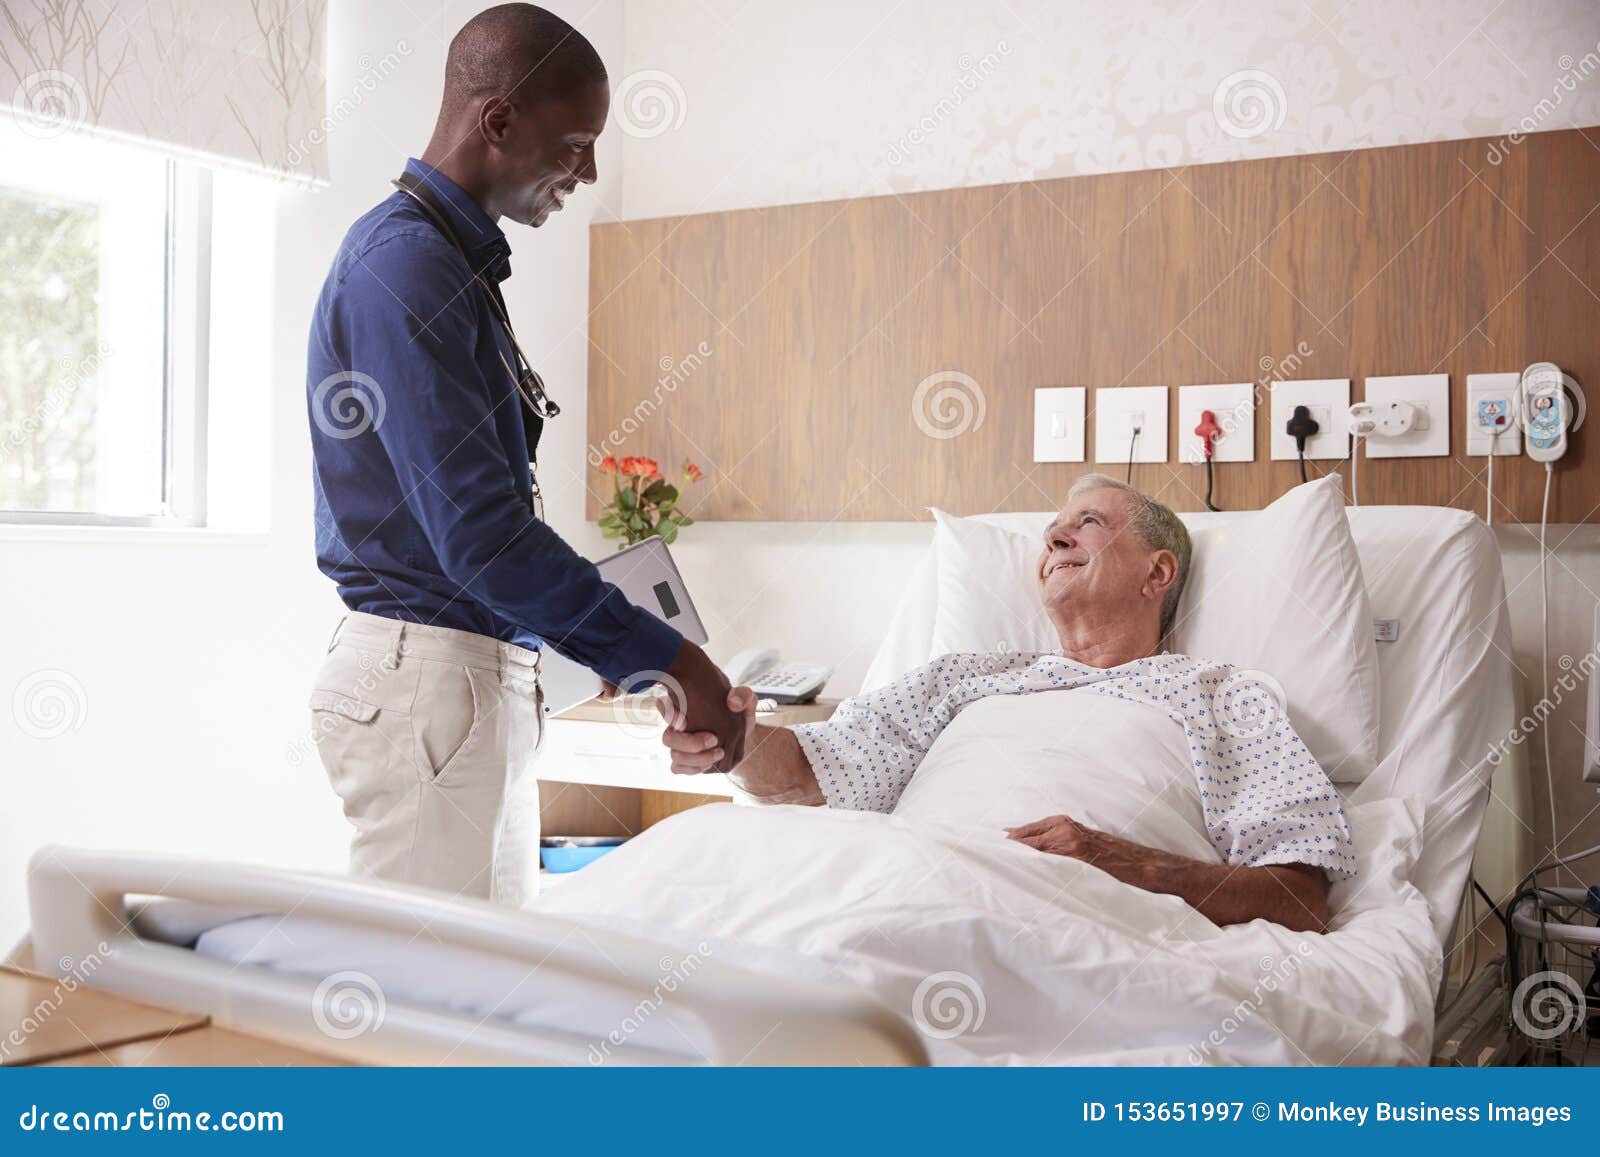 doctor shaking hands with senior male patient in hospital bed in geriatric unit